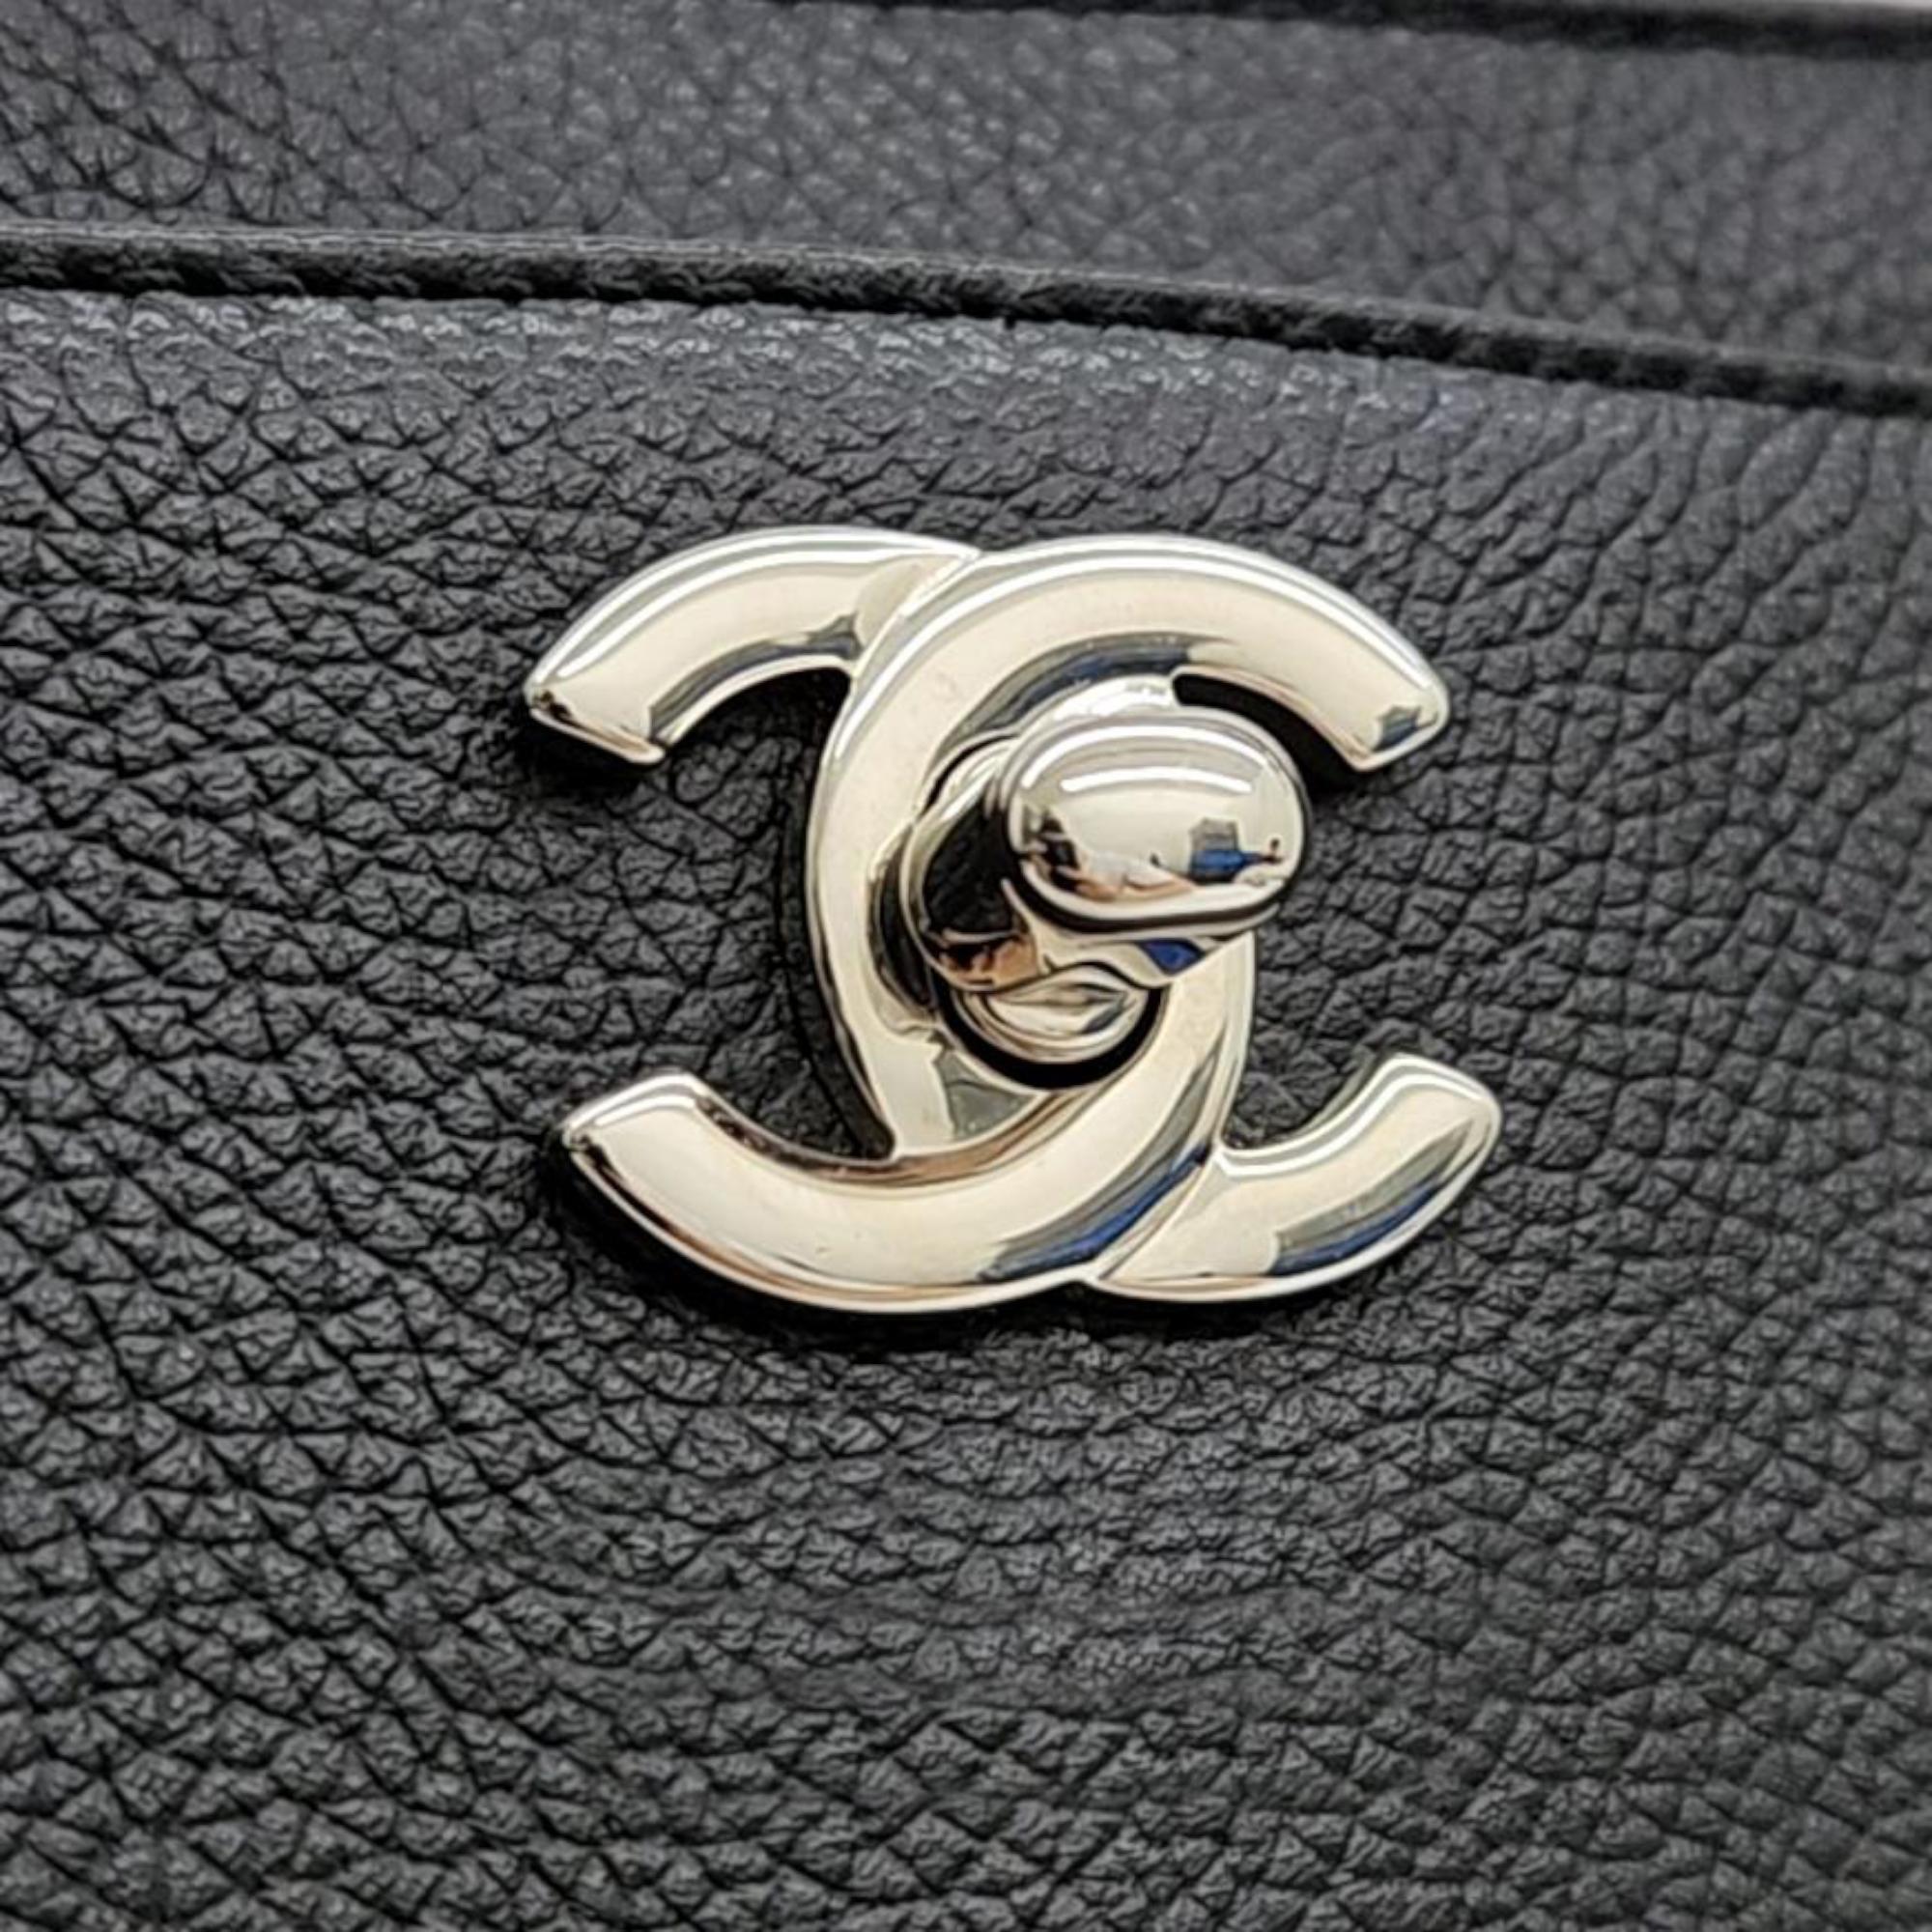 Chanel Black Leather Executive Cerf Tote Bag